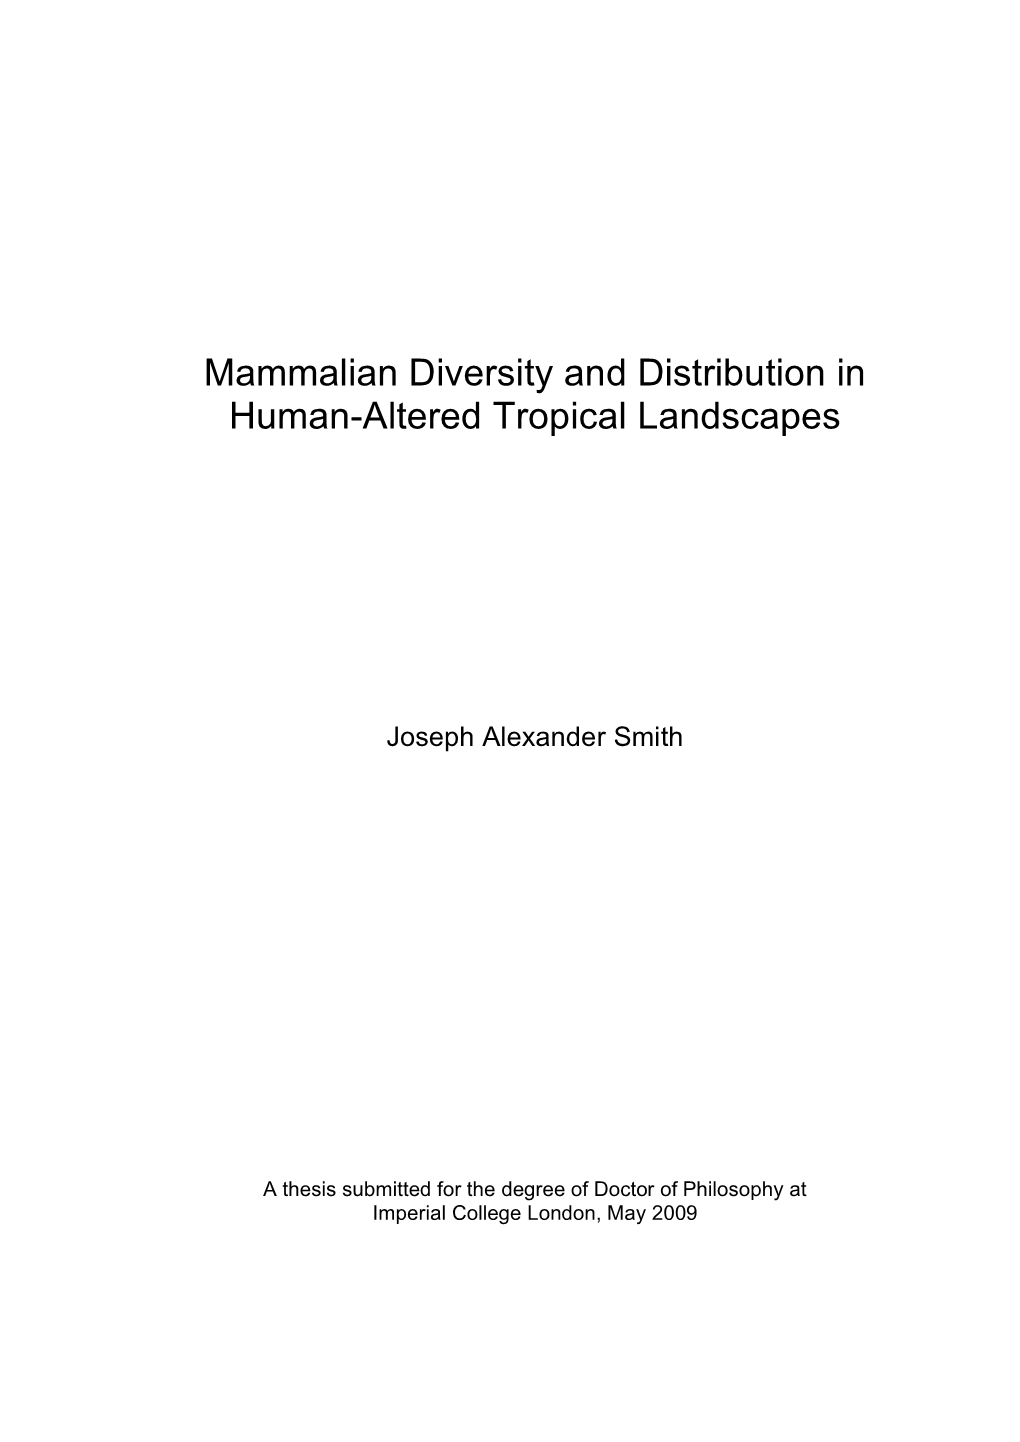 Mammalian Diversity and Distribution in Human-Altered Tropical Landscapes